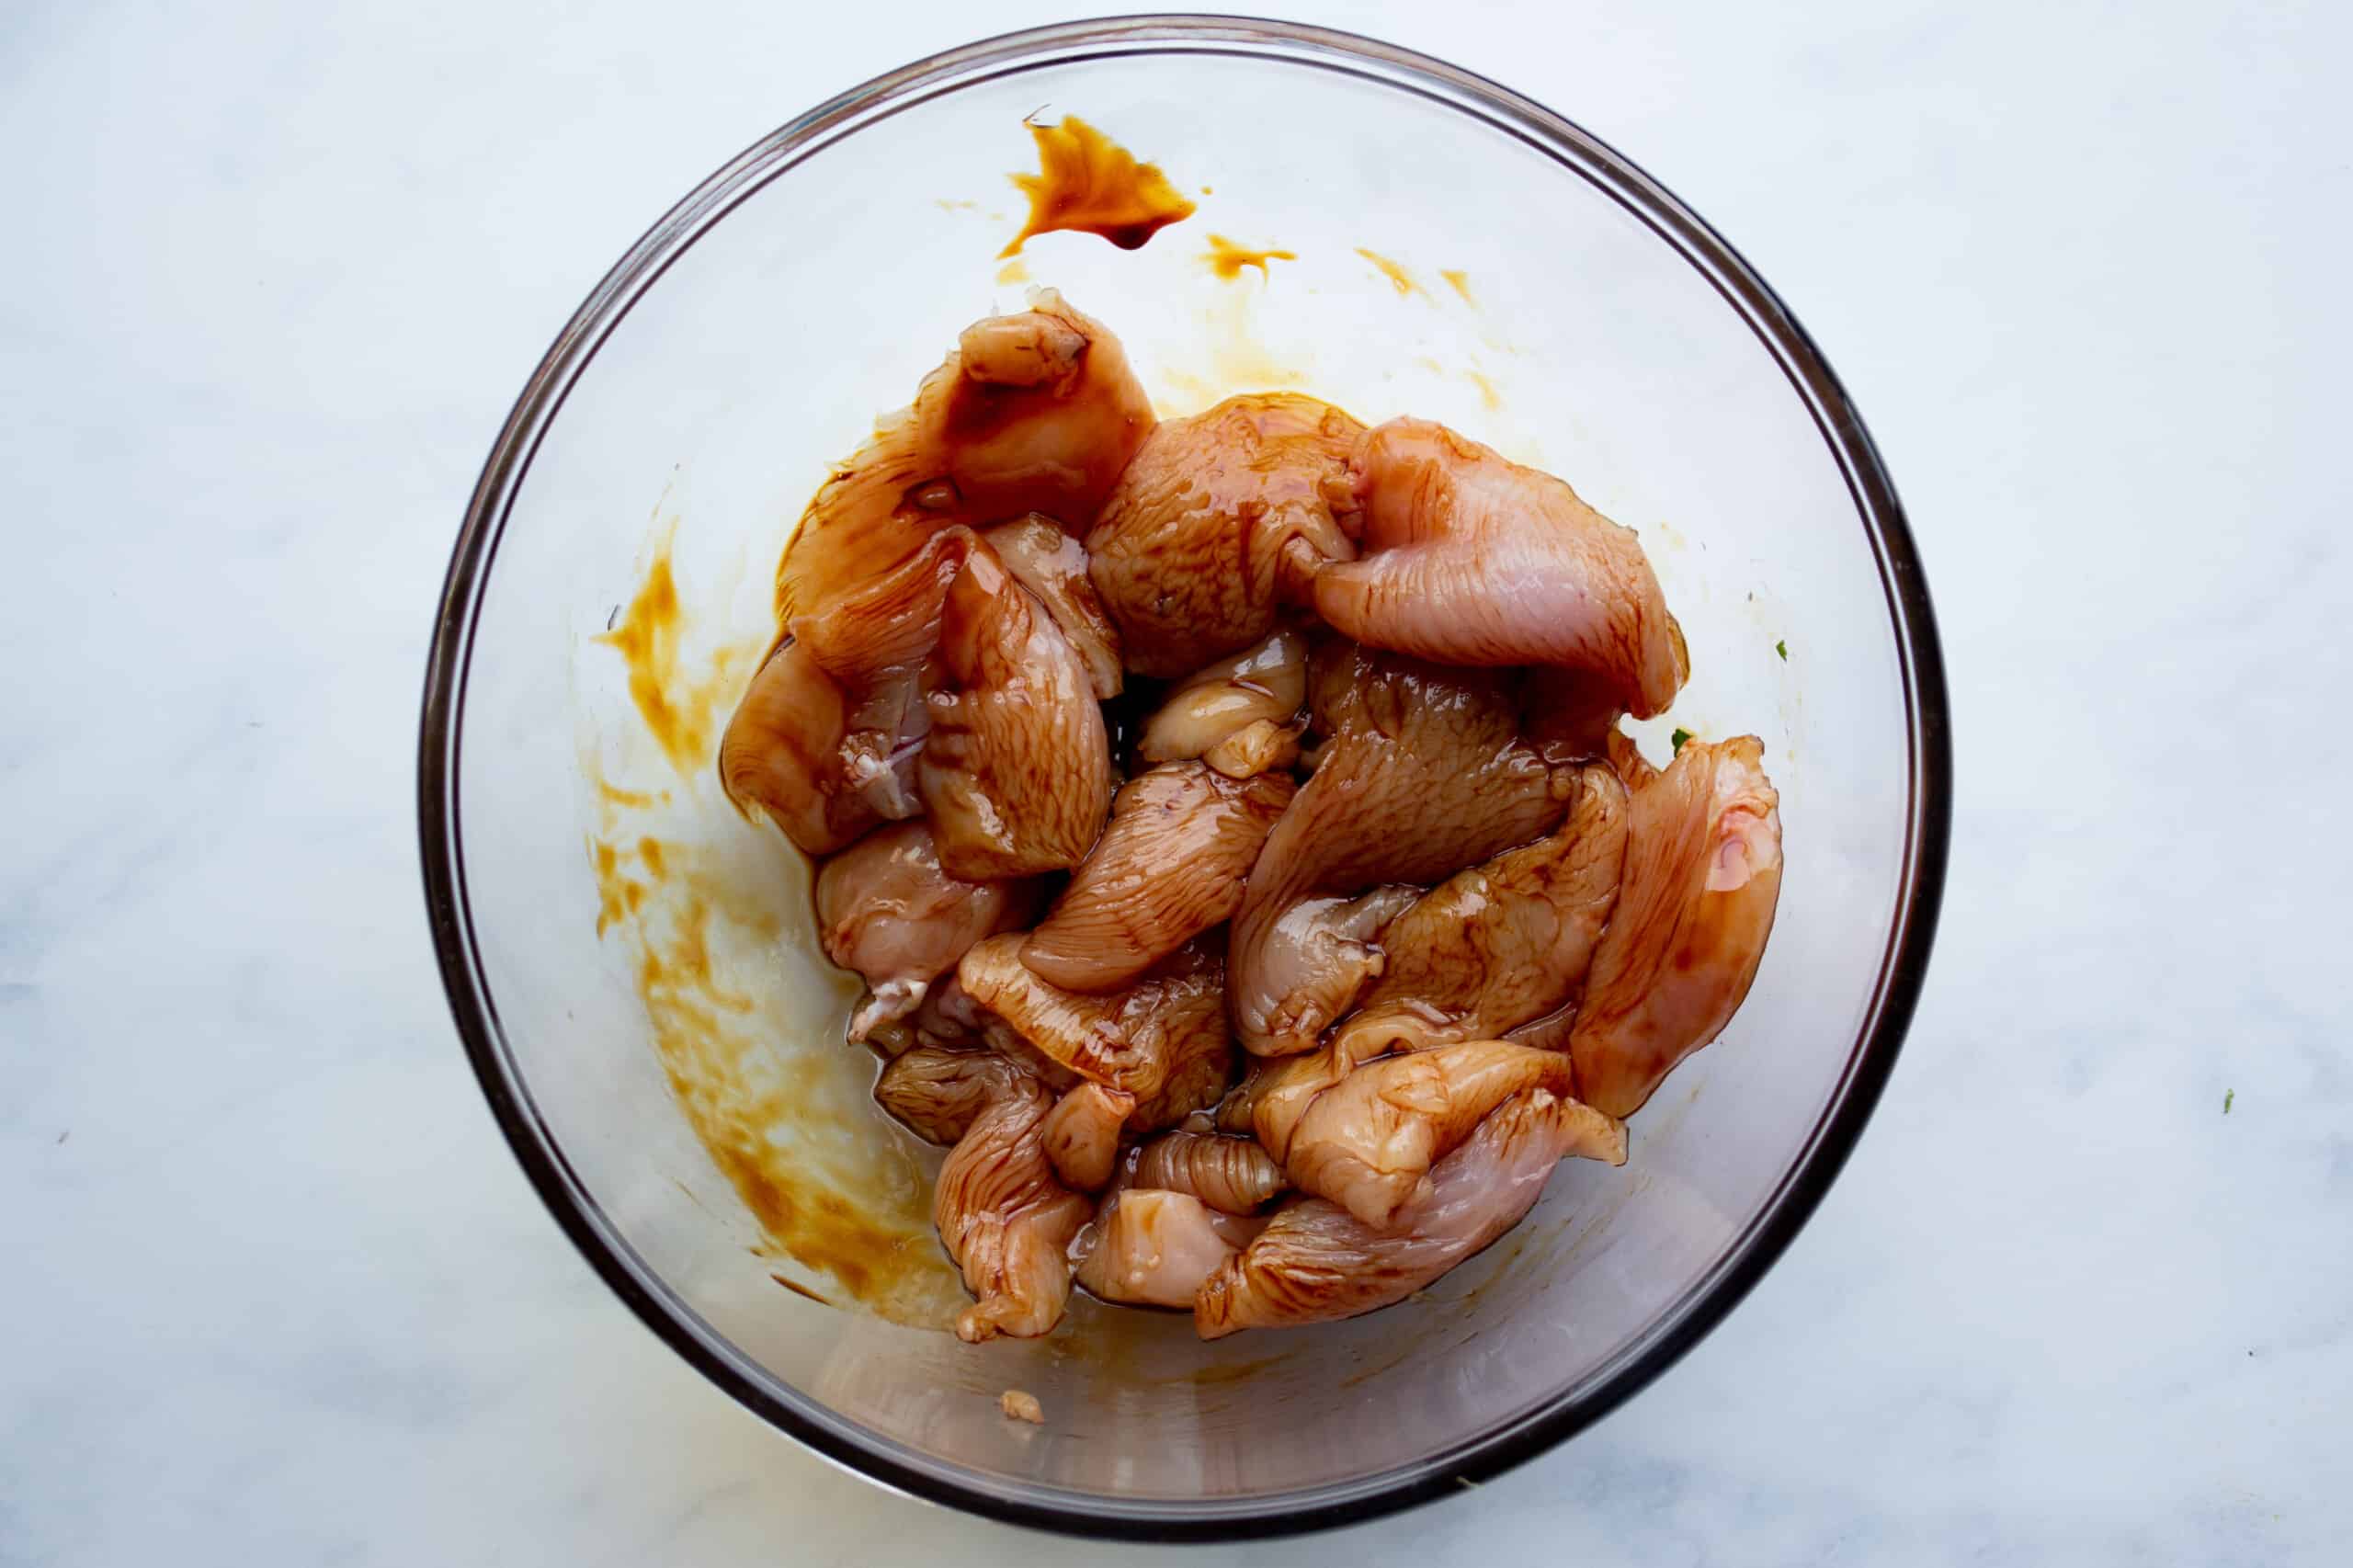 Chicken pieces marinated in the soy sauce in a glass bowl.